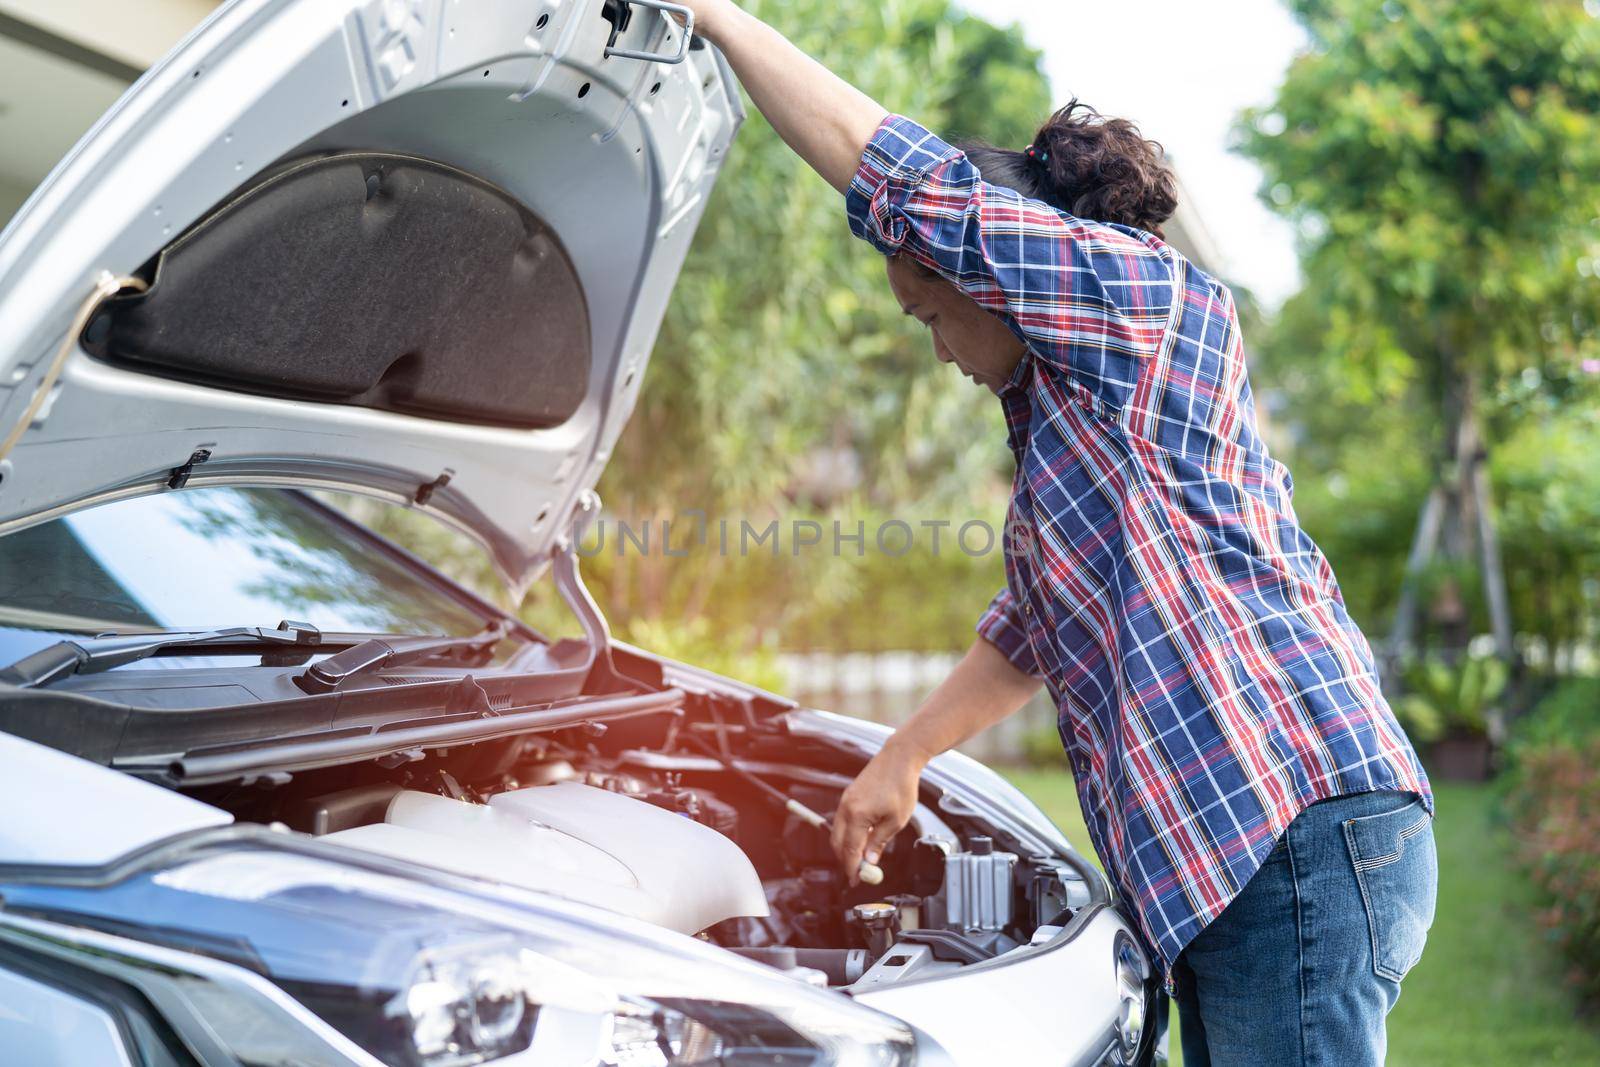 Open hood mechanic engine system to check and repair damage car crash.